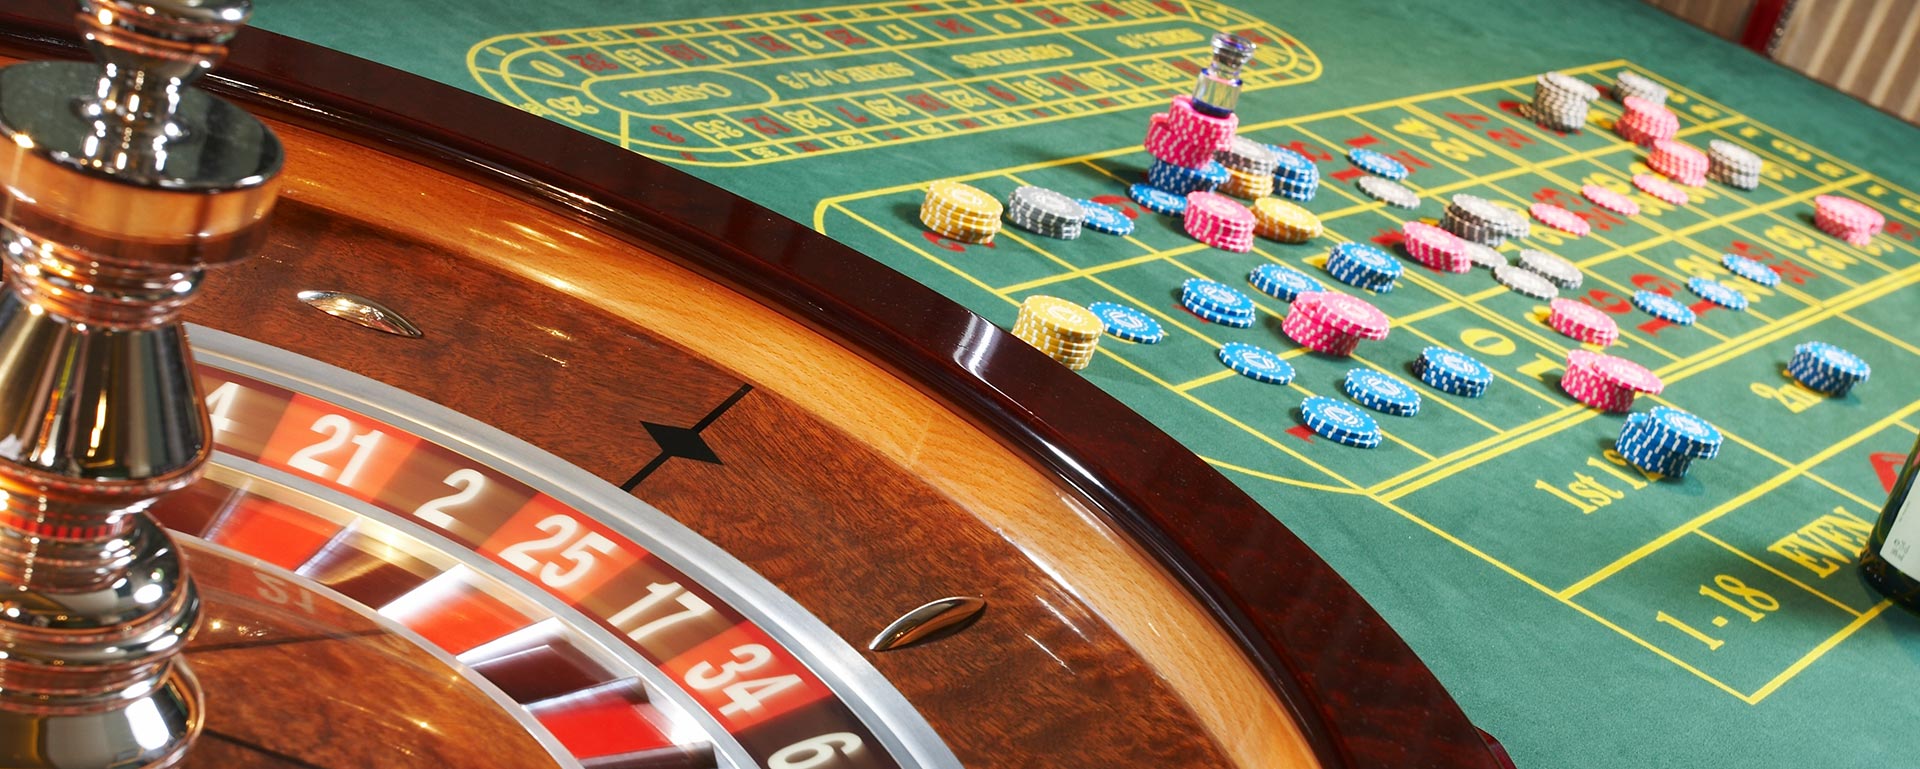 Roulette Bets - All Betting Options Explained | LV BET Casino Blog